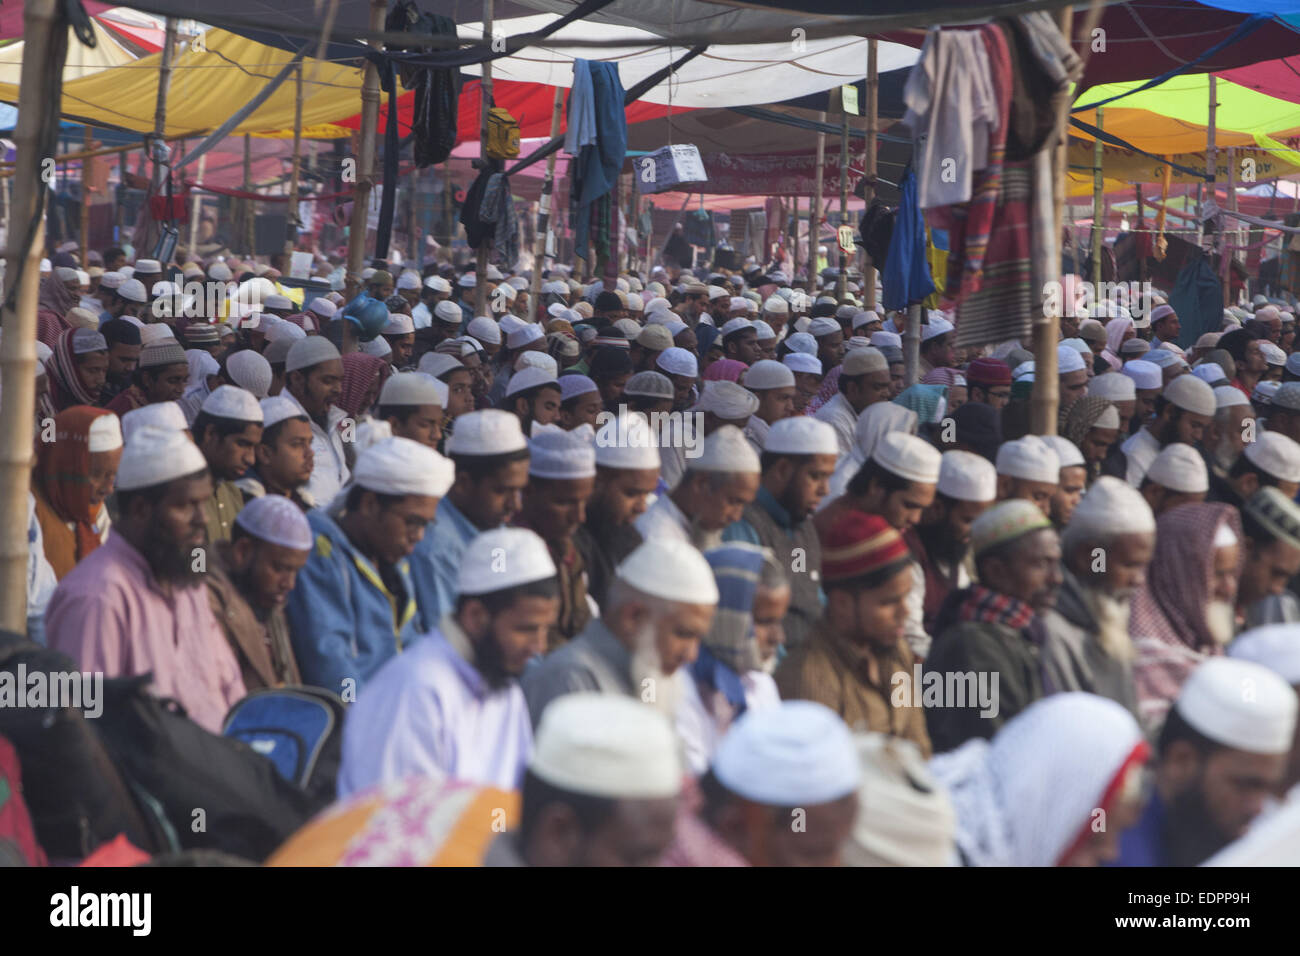 Dhaka, Bangladesh. 8th Jan, 2015. Thousands of Muslims attend the World largest 2nd Muslim congregation.Its the biggest congregation after Hajj.The first phase of the annual congregation will began on Friday on the bank of Turag River on the outskirts of Dhaka. Bangladesh capital Dhaka now with religious sermons for millions from home and abroad. Credit:  Zakir Hossain Chowdhury/ZUMA Wire/Alamy Live News Stock Photo